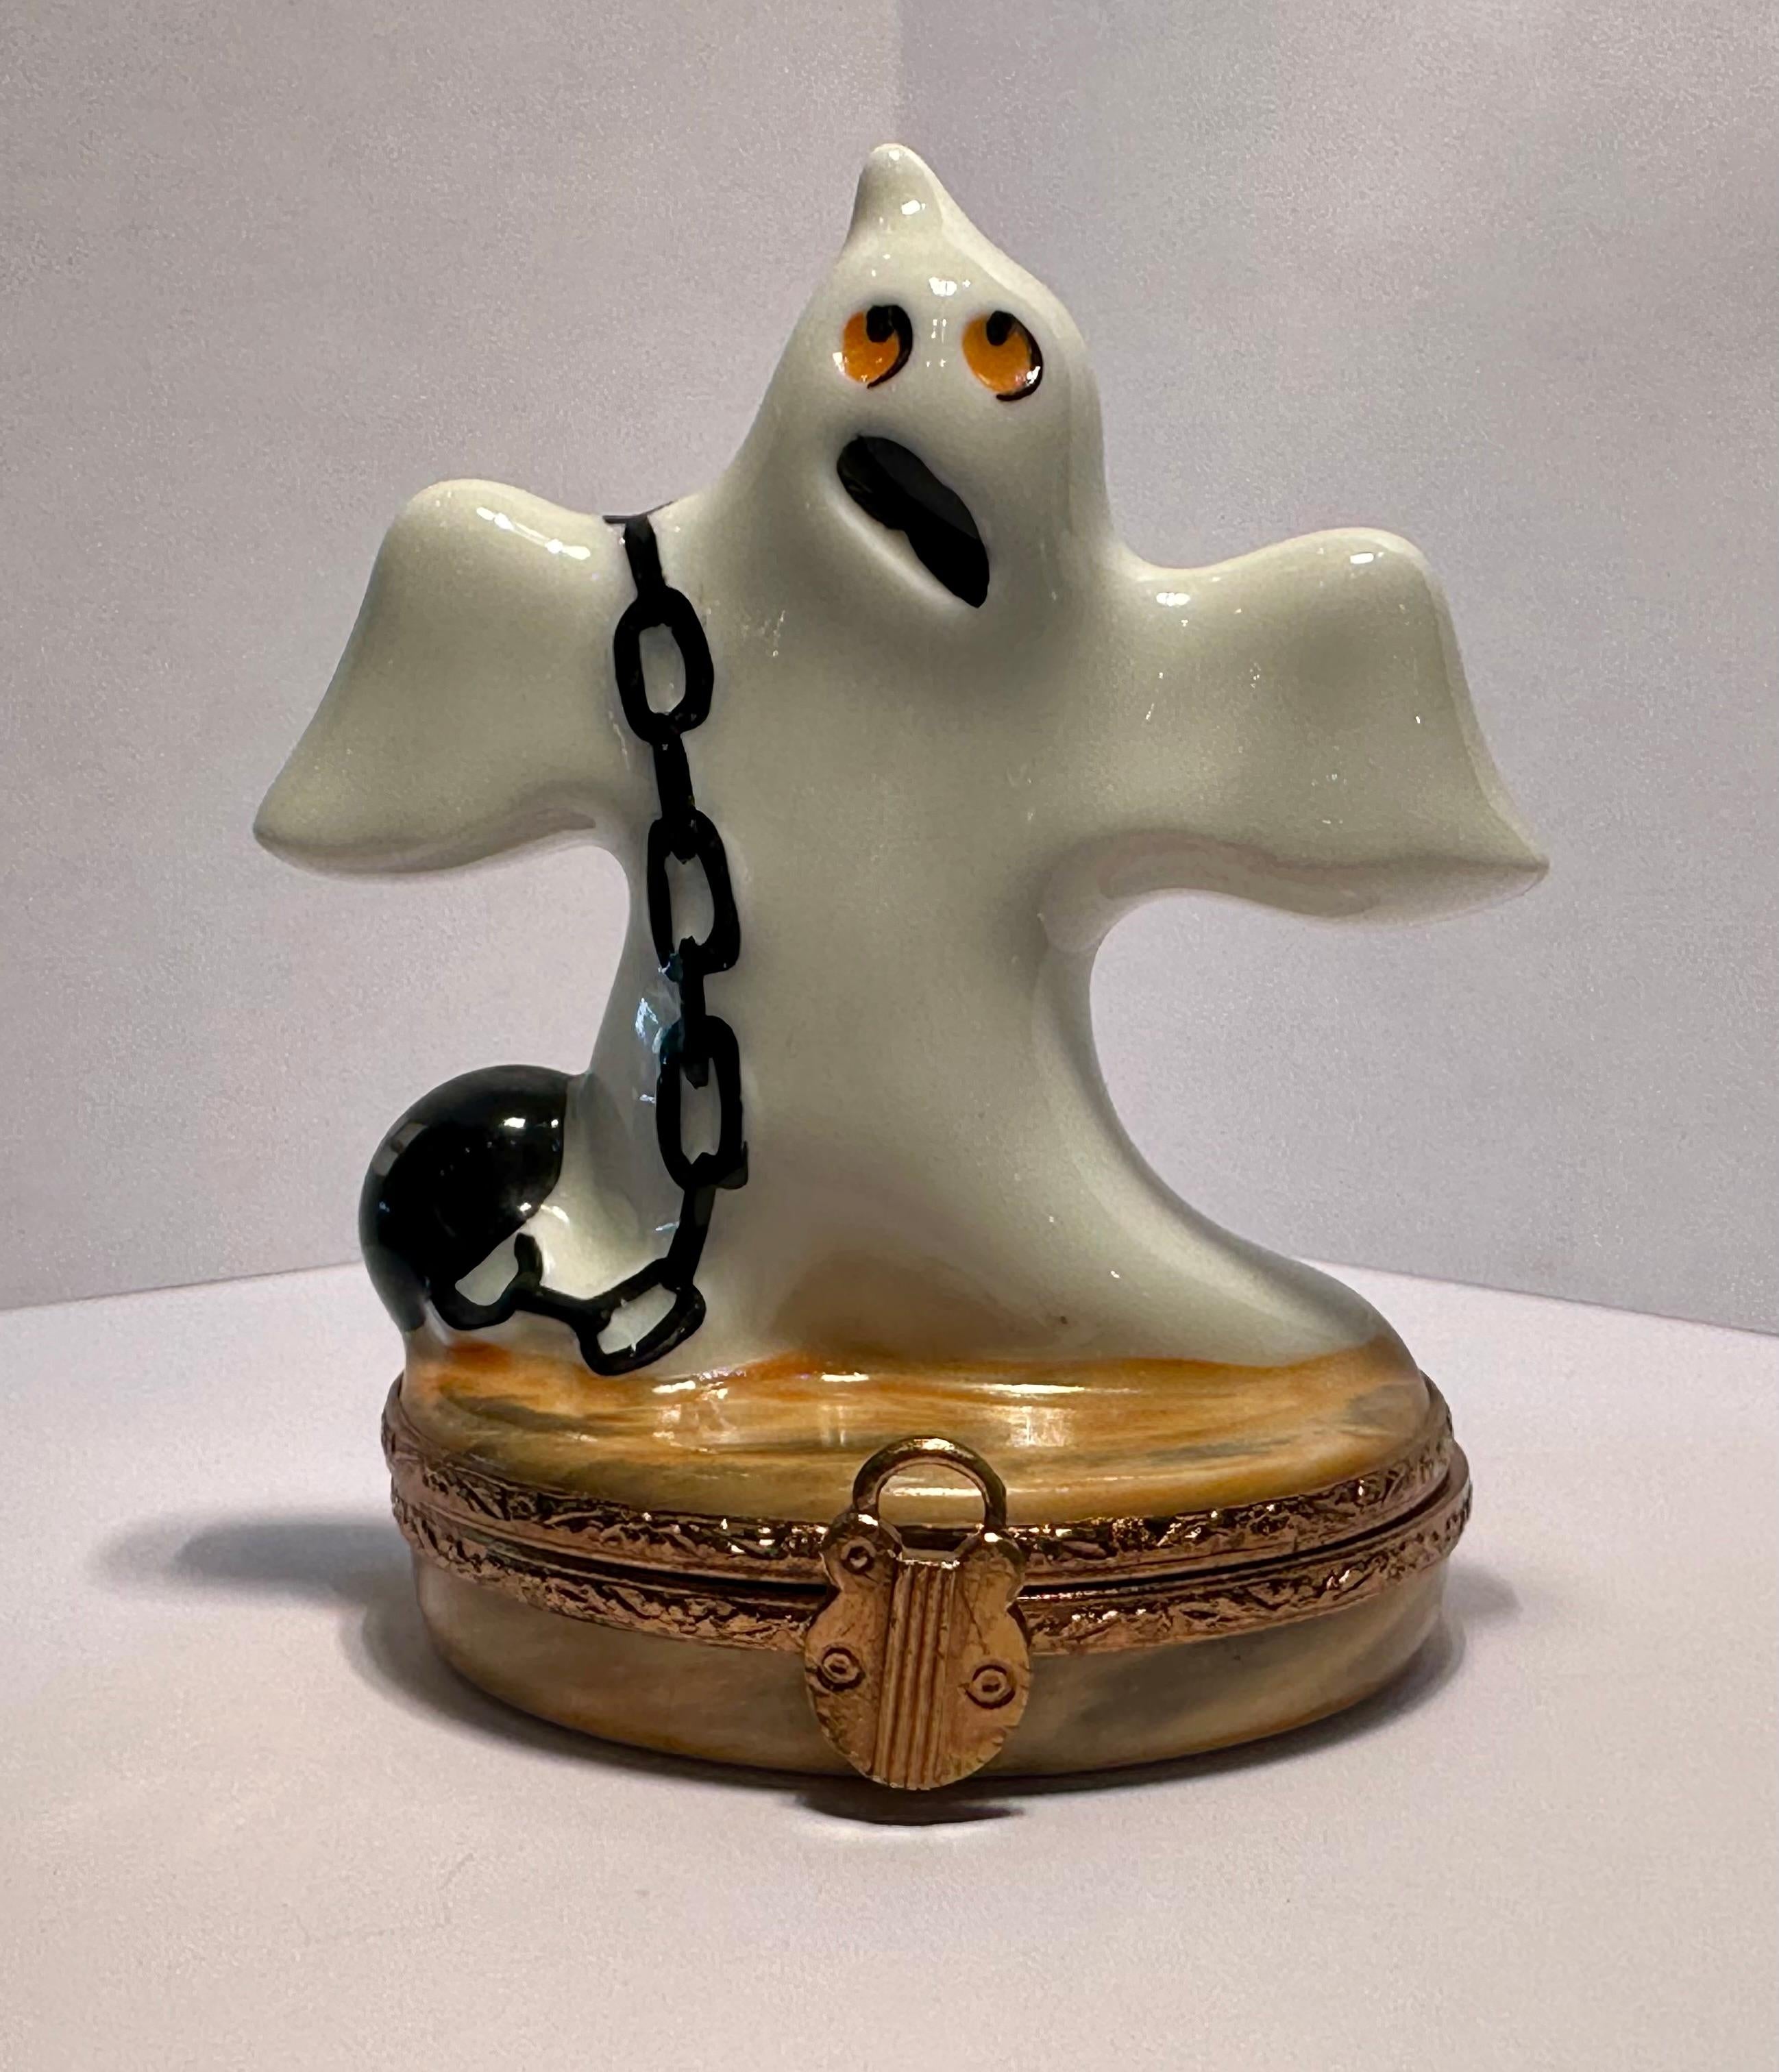 Collectible and whimsical, limited edition Limoges porcelain Halloween motif miniature trinket box is handmade and hand painted in France and features an adorable and very expressive ghost with big orange oval shaped eyes and a black mouth open,